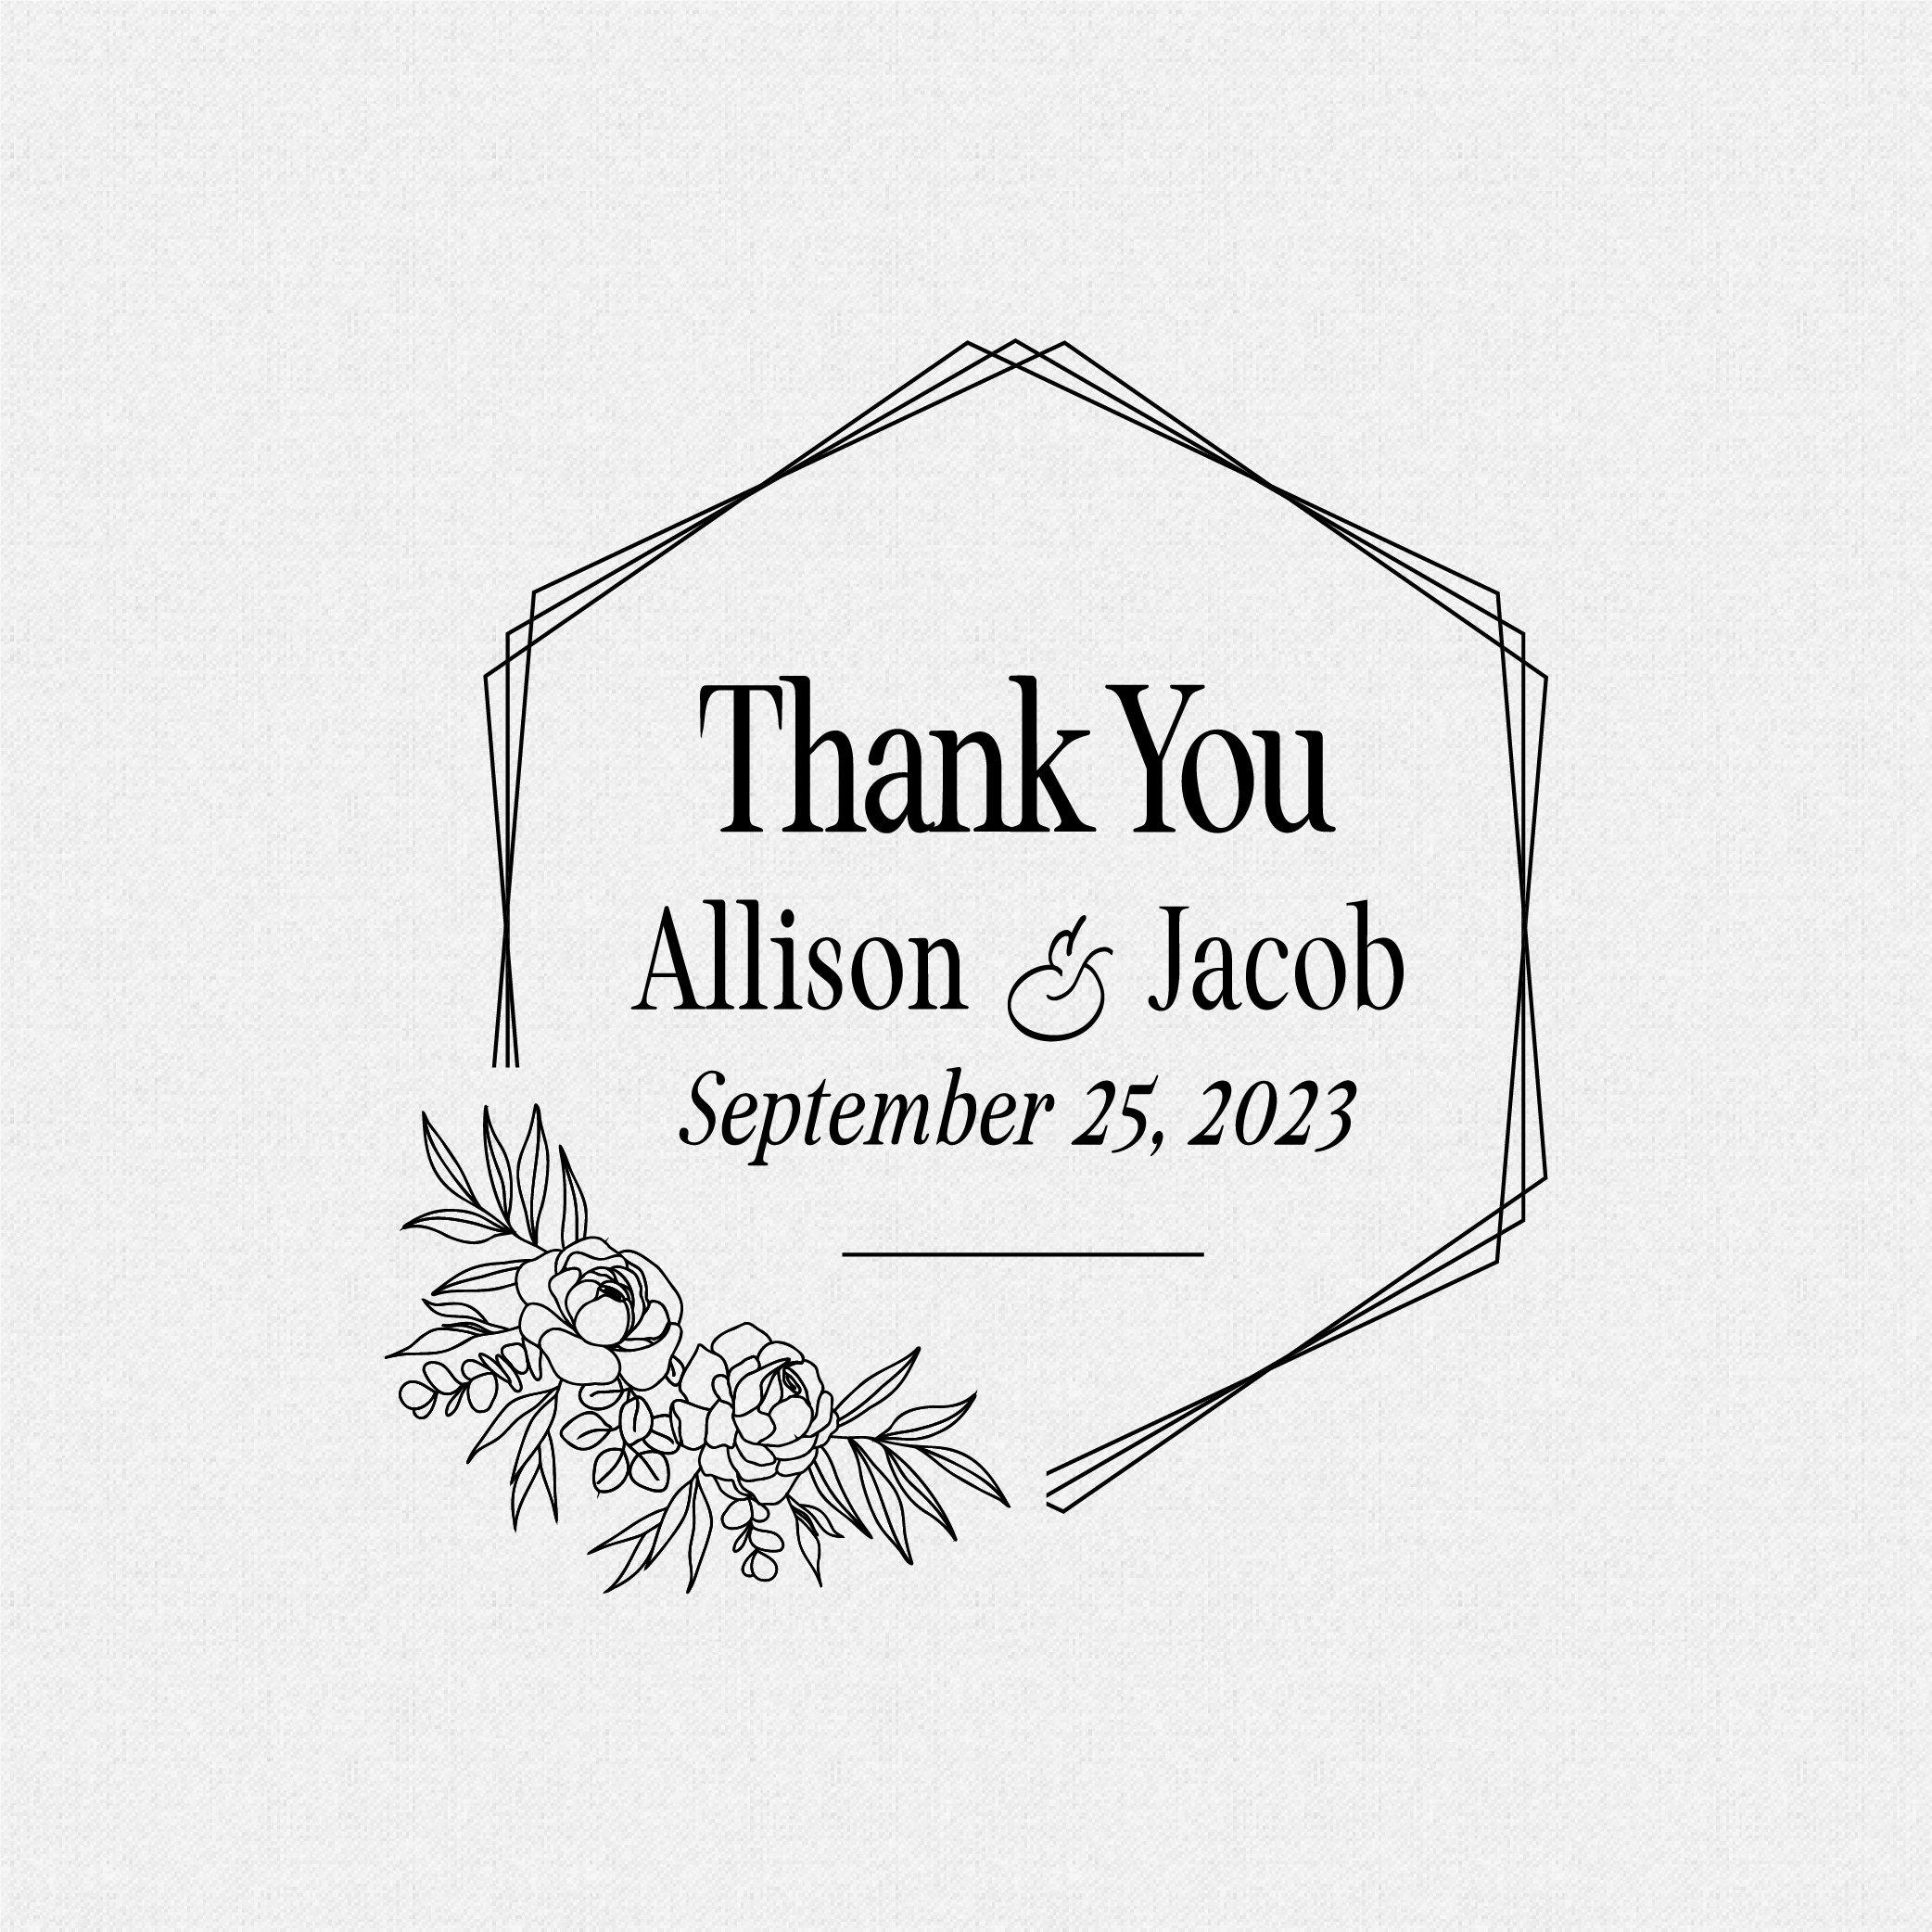 Personalized Thank You Rubber Stamp for Wedding Favors in a Hexagon Style with Peonies Florals - Style T#573